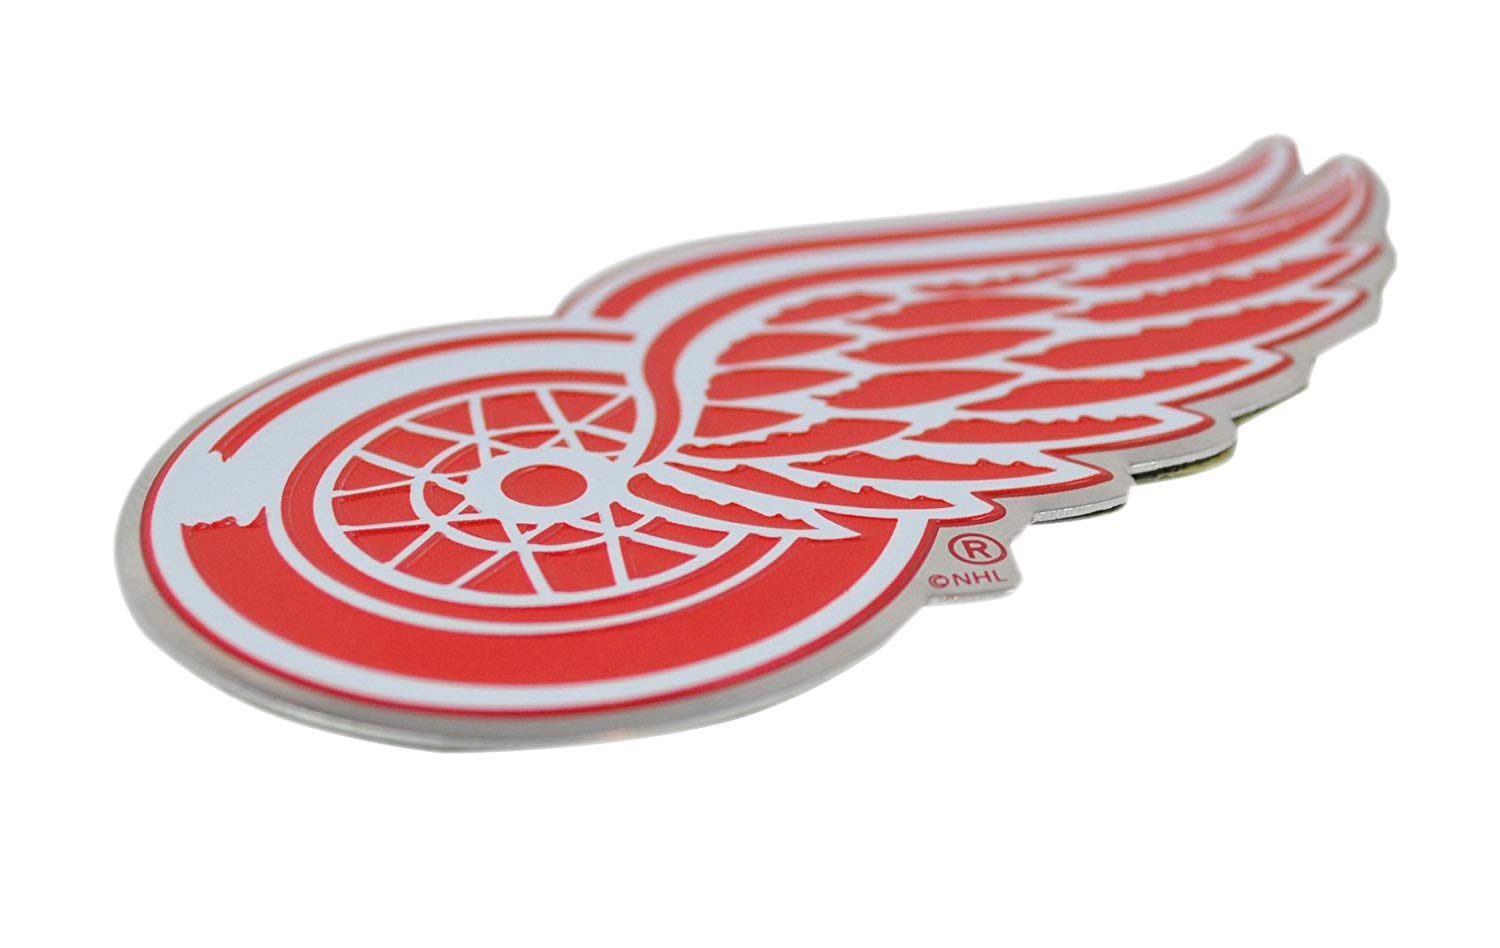 Official National Hockey League Fan Shop Licensed NHL Shop Authentic Chrome License Plate Frame and Chrome Colored Auto Emblem (Detroit Red Wings)